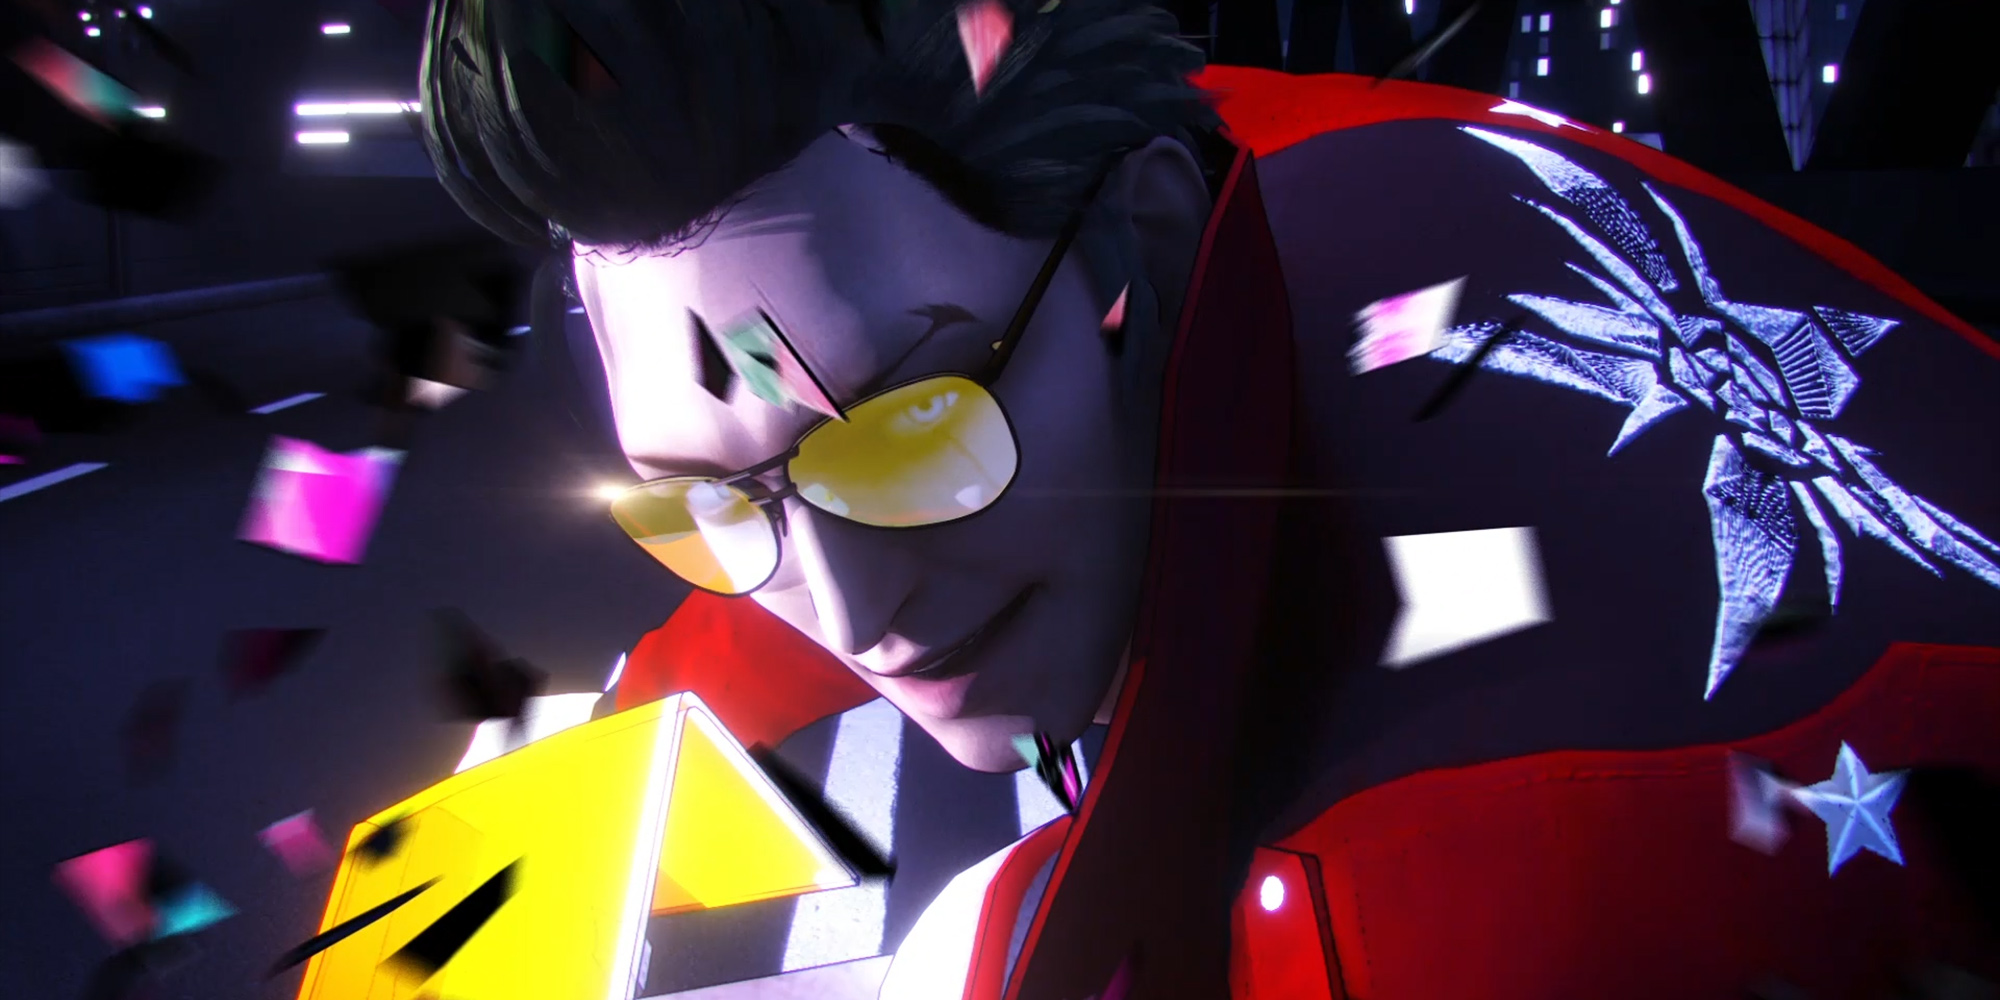 Just who the heck is Travis Touchdown?